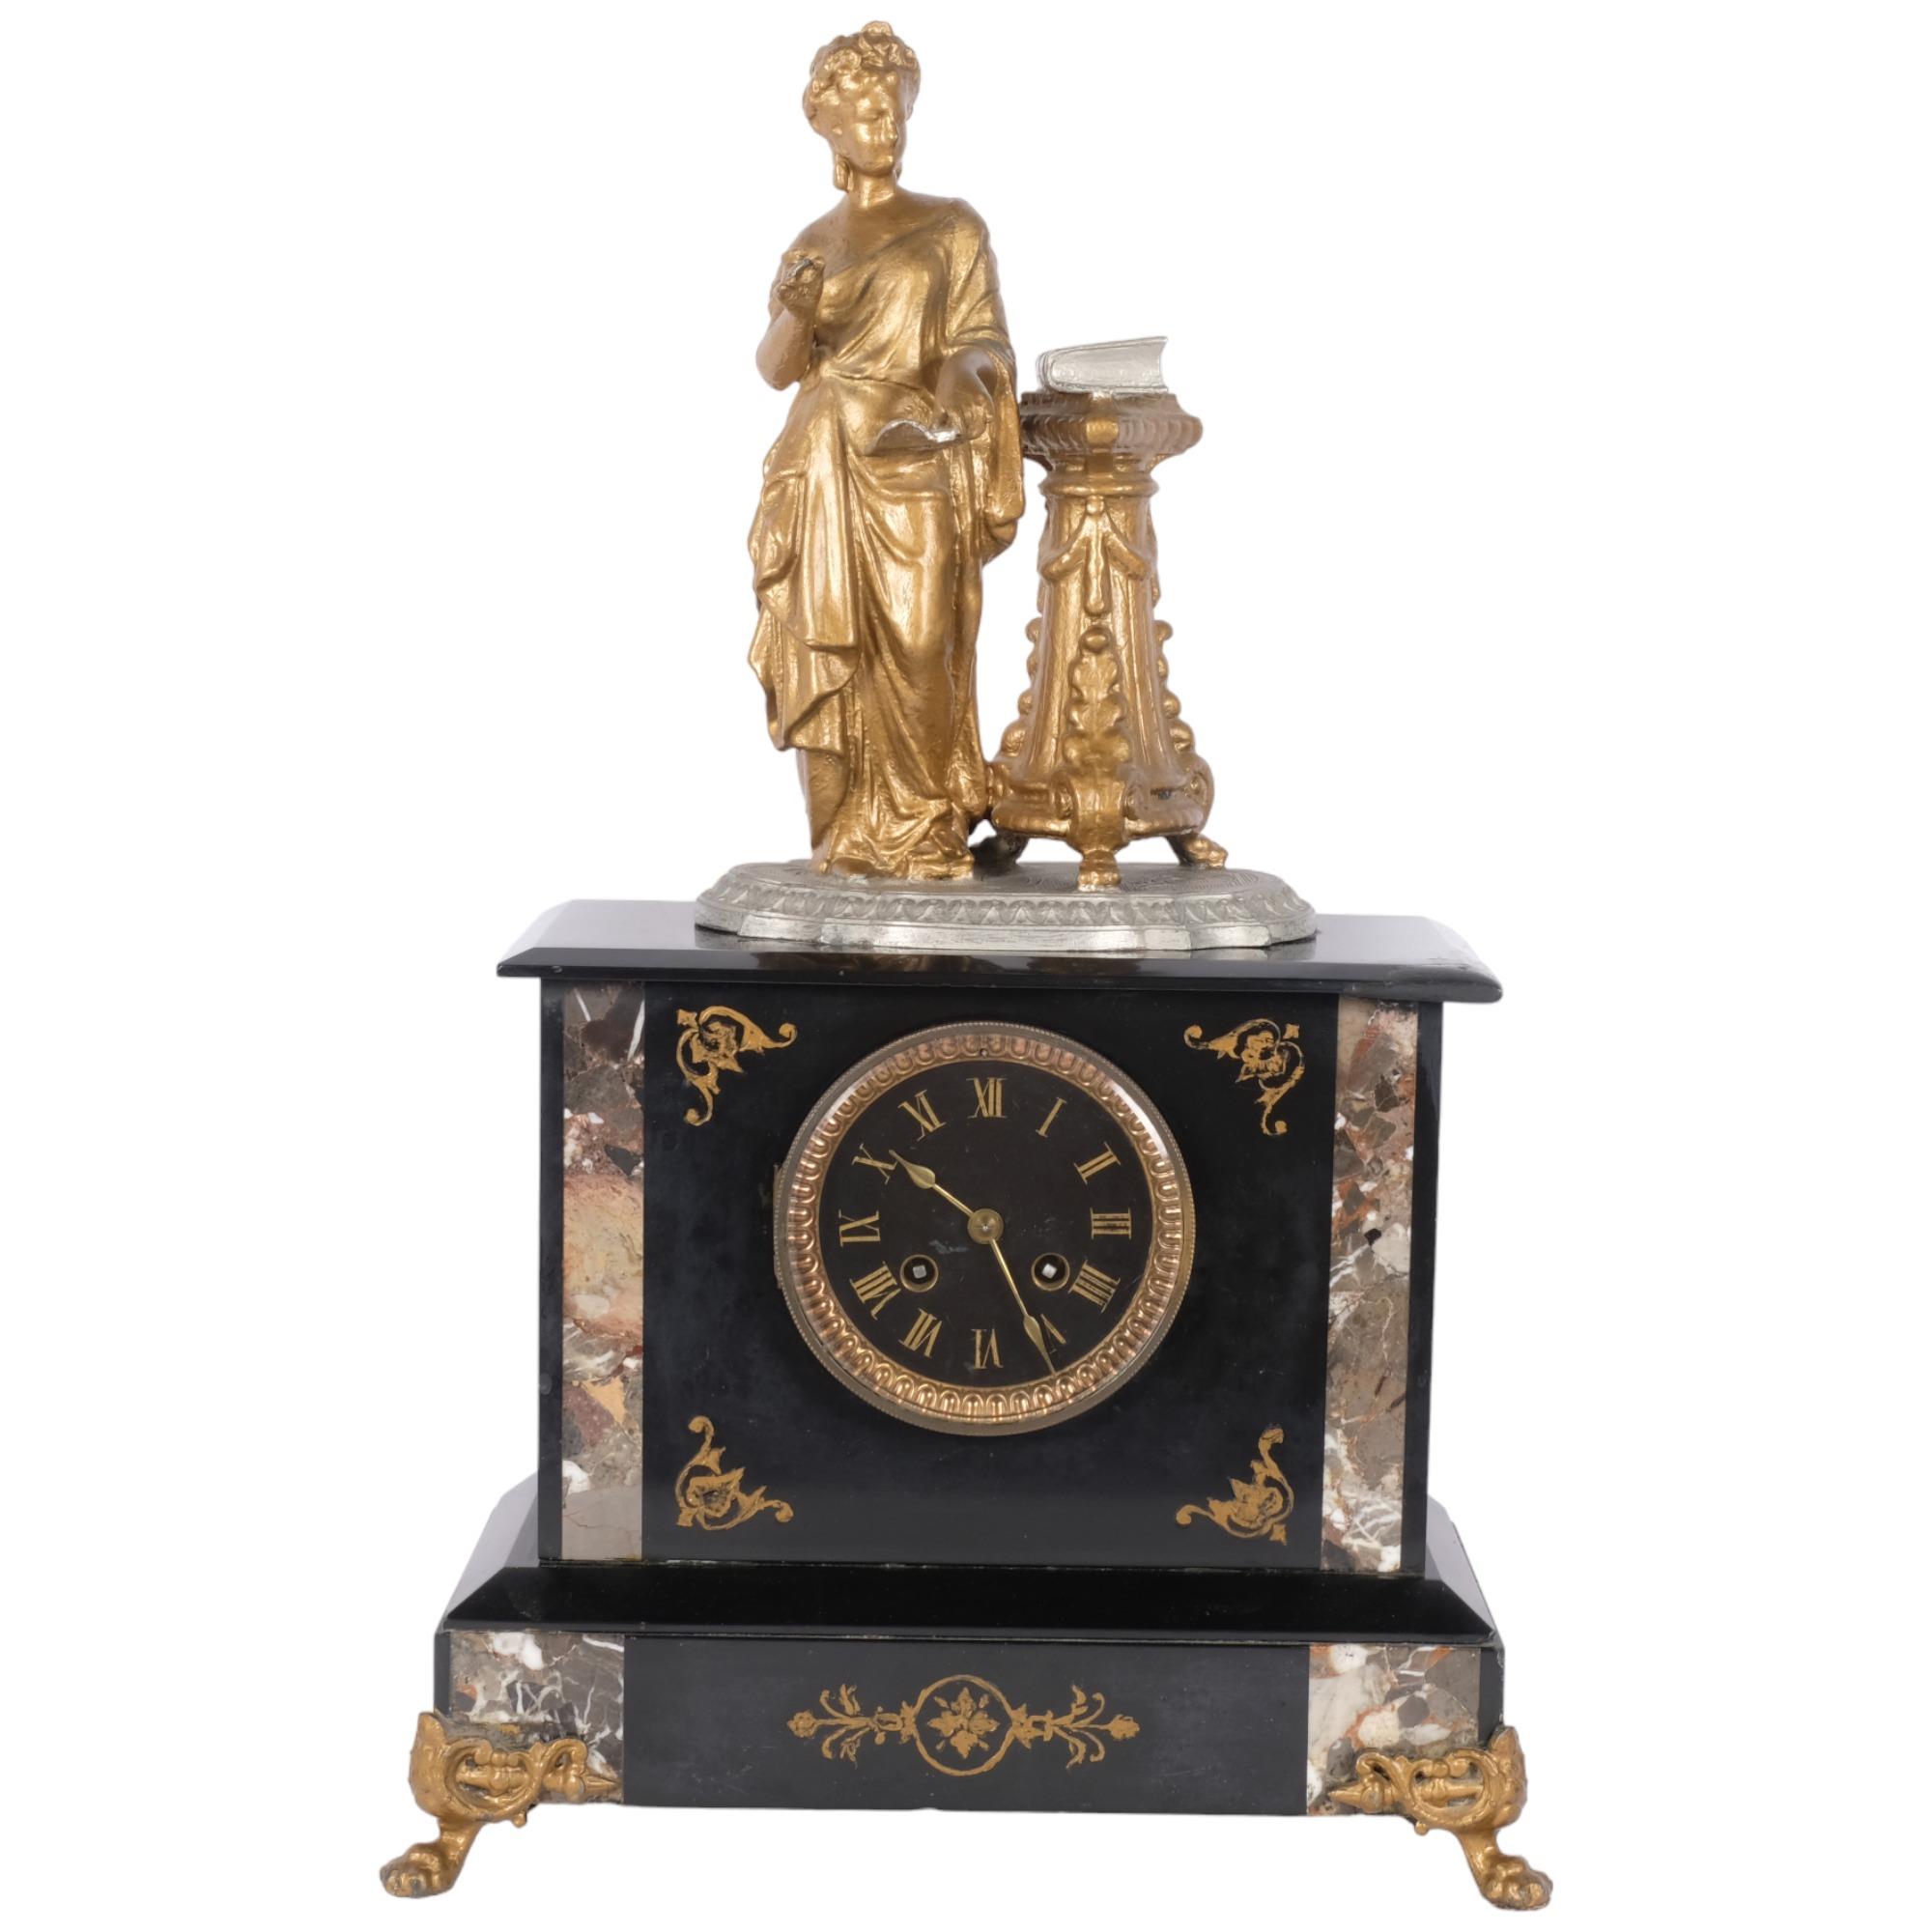 A 19th century slate and marble mantel clock, the 8-day French striking movement surmounted by a